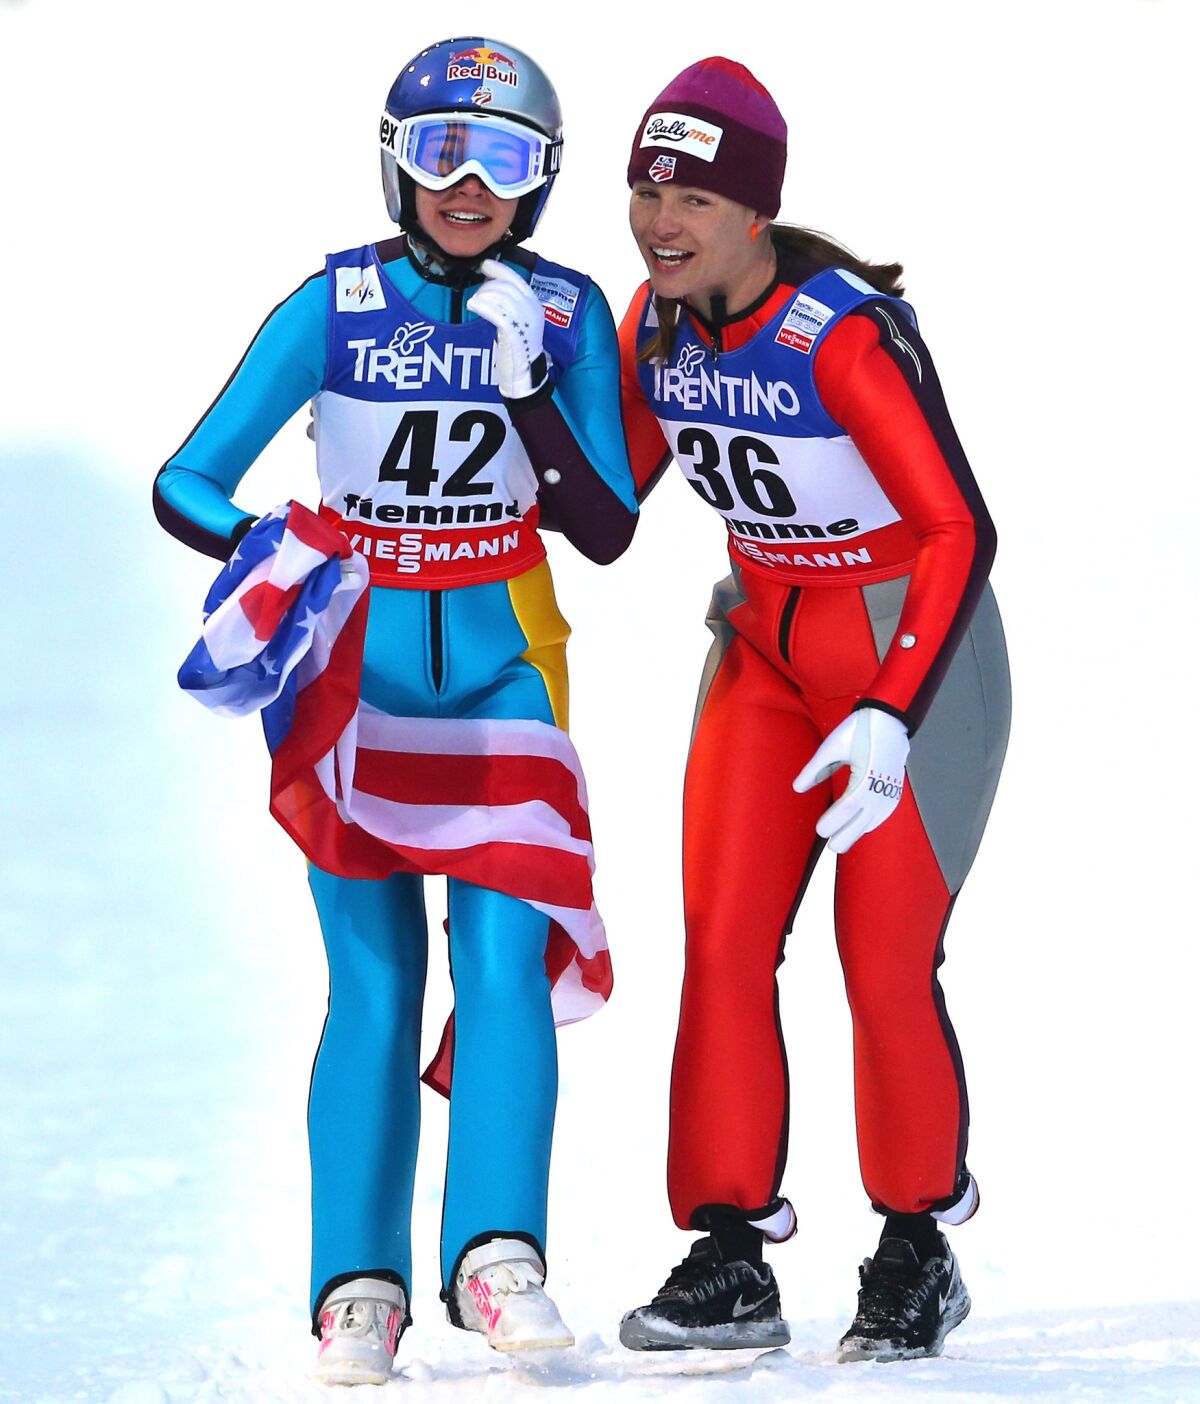 After winning an event at the FIS Nordic World Ski Championships in Italy last February, U.S. competitor Sarah Hendrickson, left, ceberates with teammate Lindsey Van.